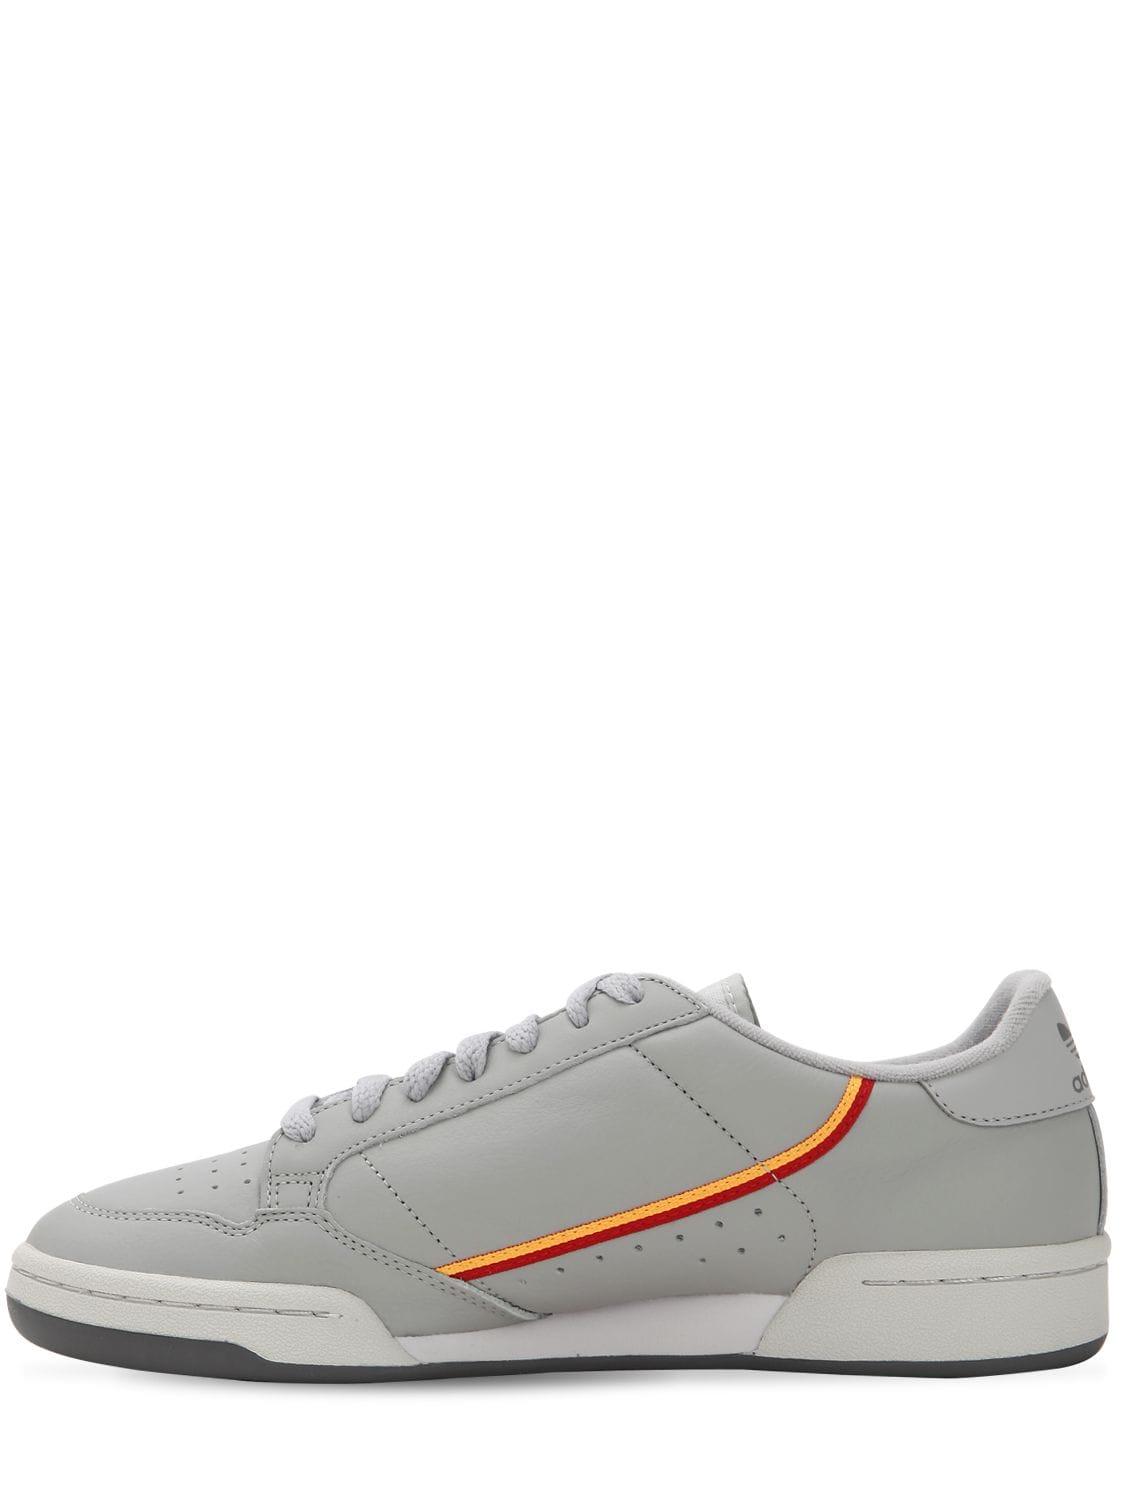 cool wipe out socks adidas Originals Continental 80 Trainers in Gray for Men | Lyst